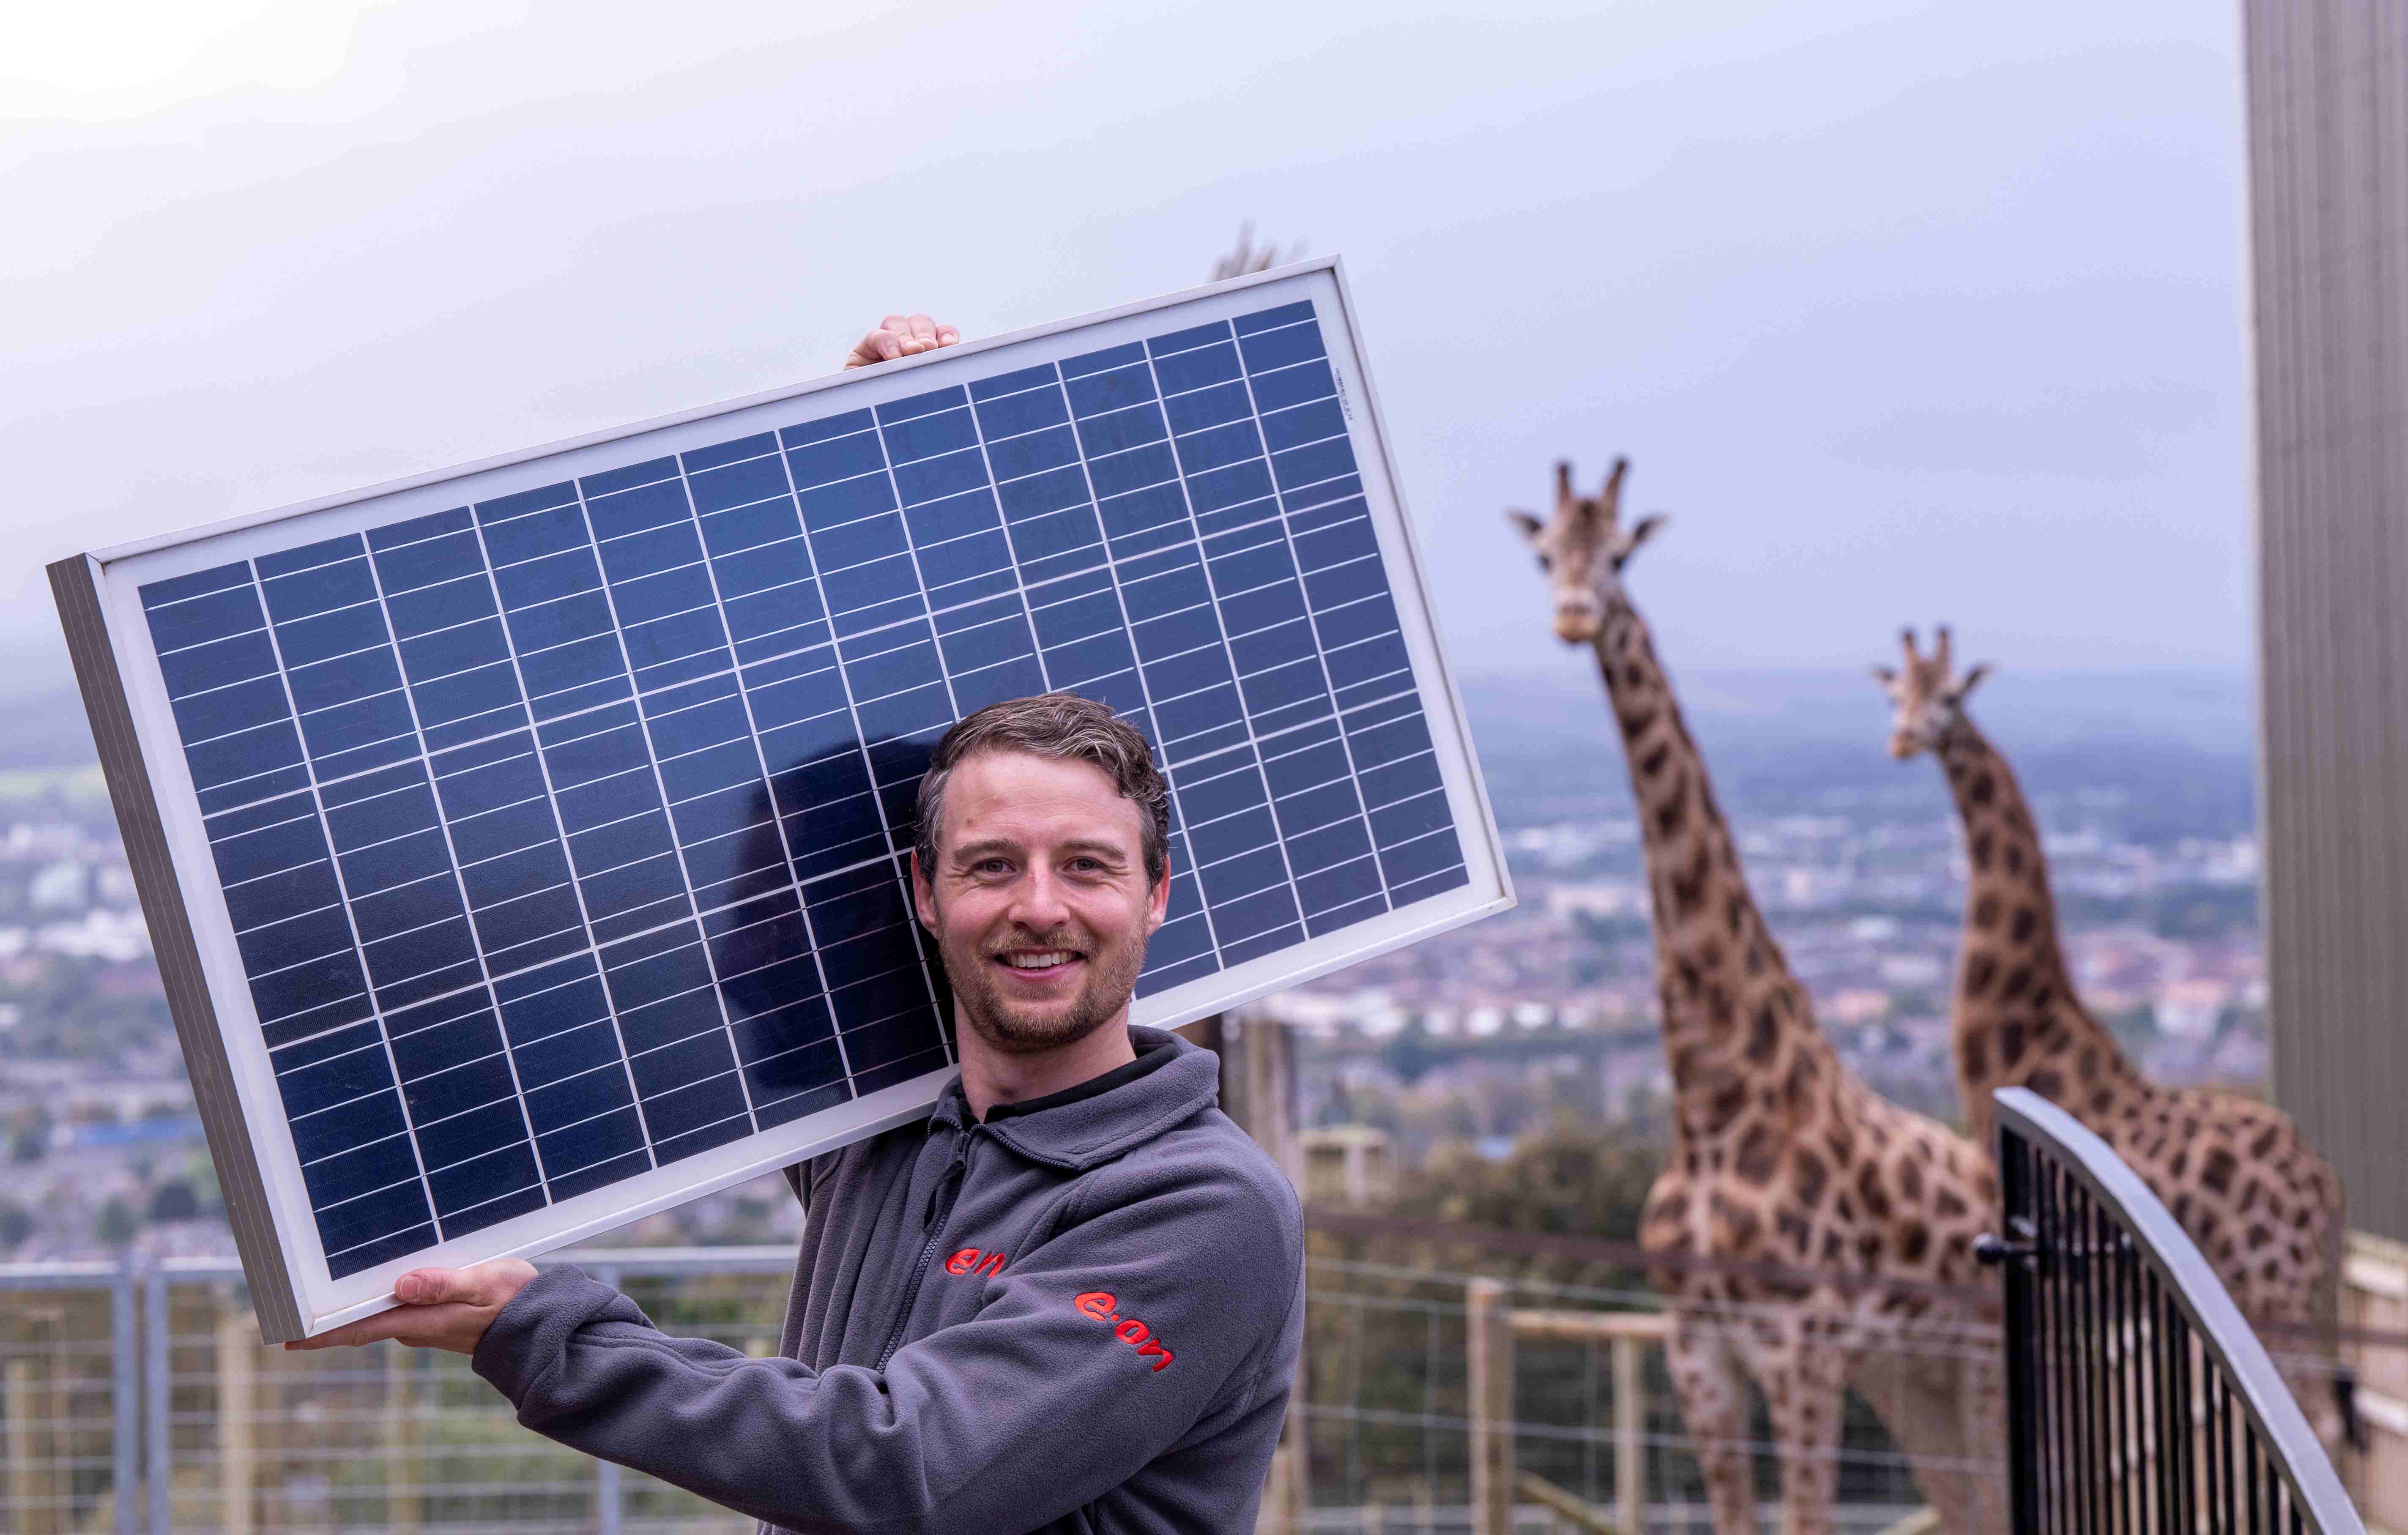 EON worker carrying solar panel for solar field beside outdoor giraffe enclosure

Image: 2023